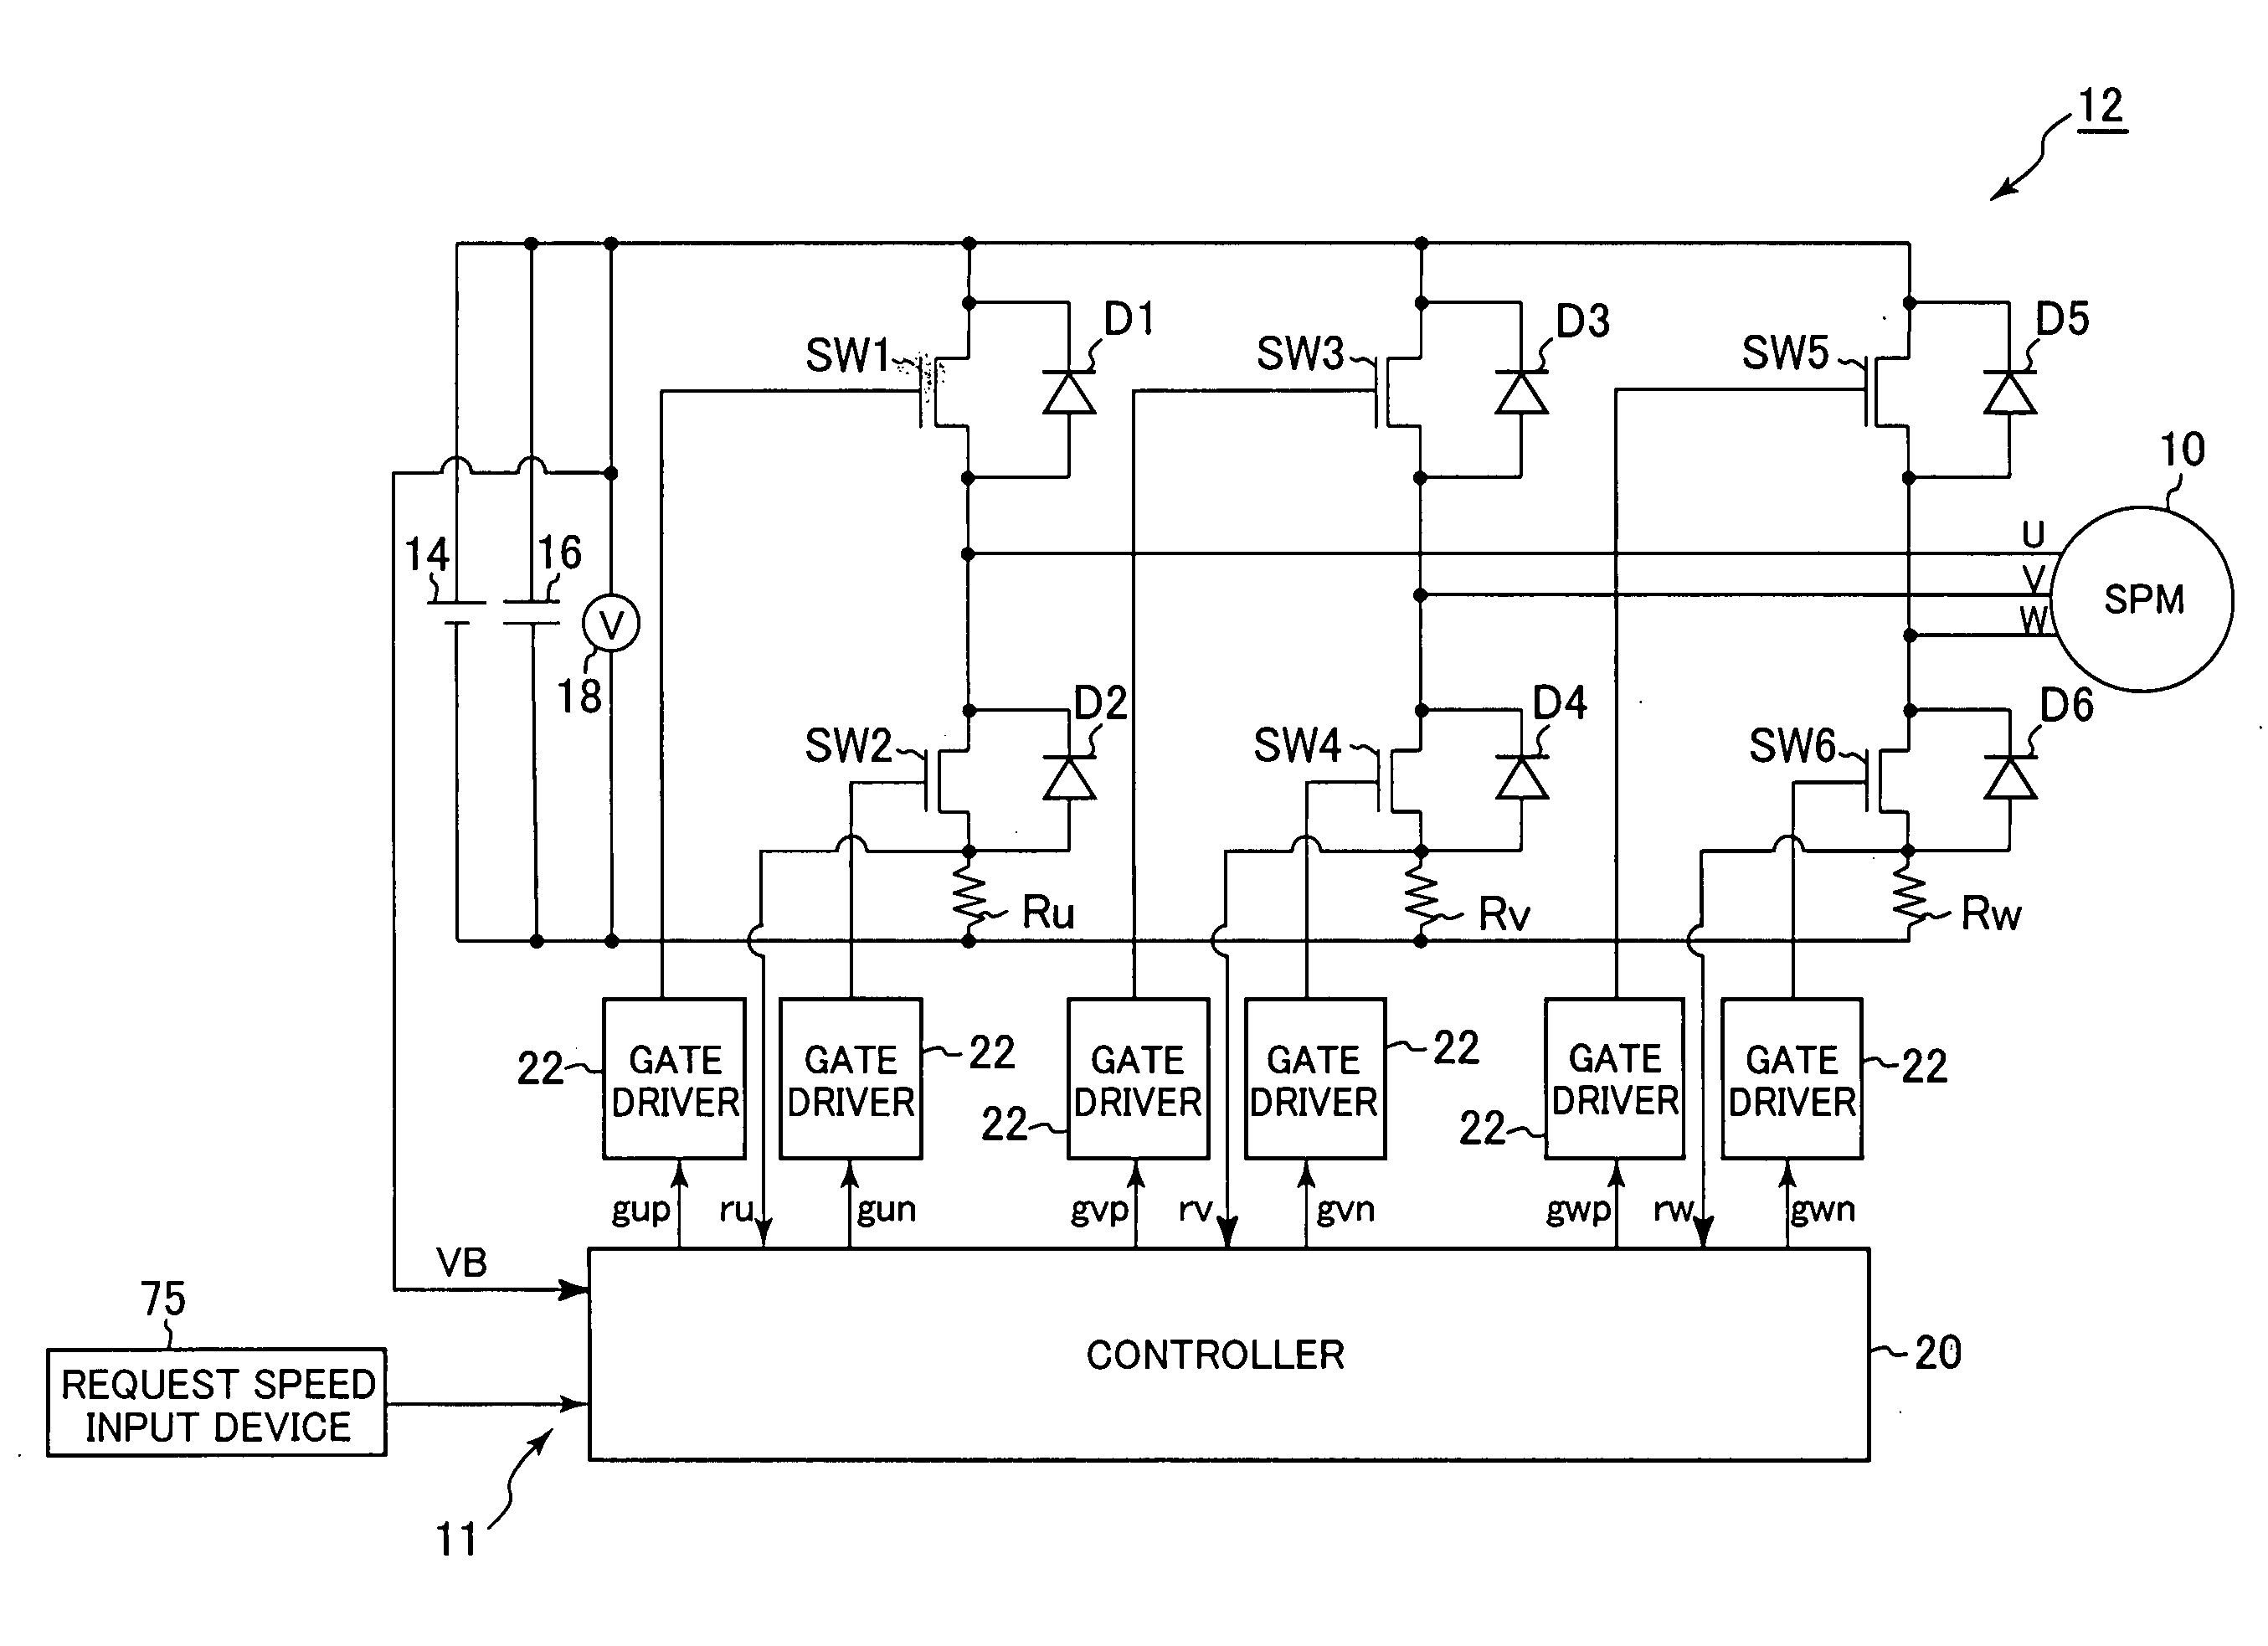 Control system for multiphase rotary machines